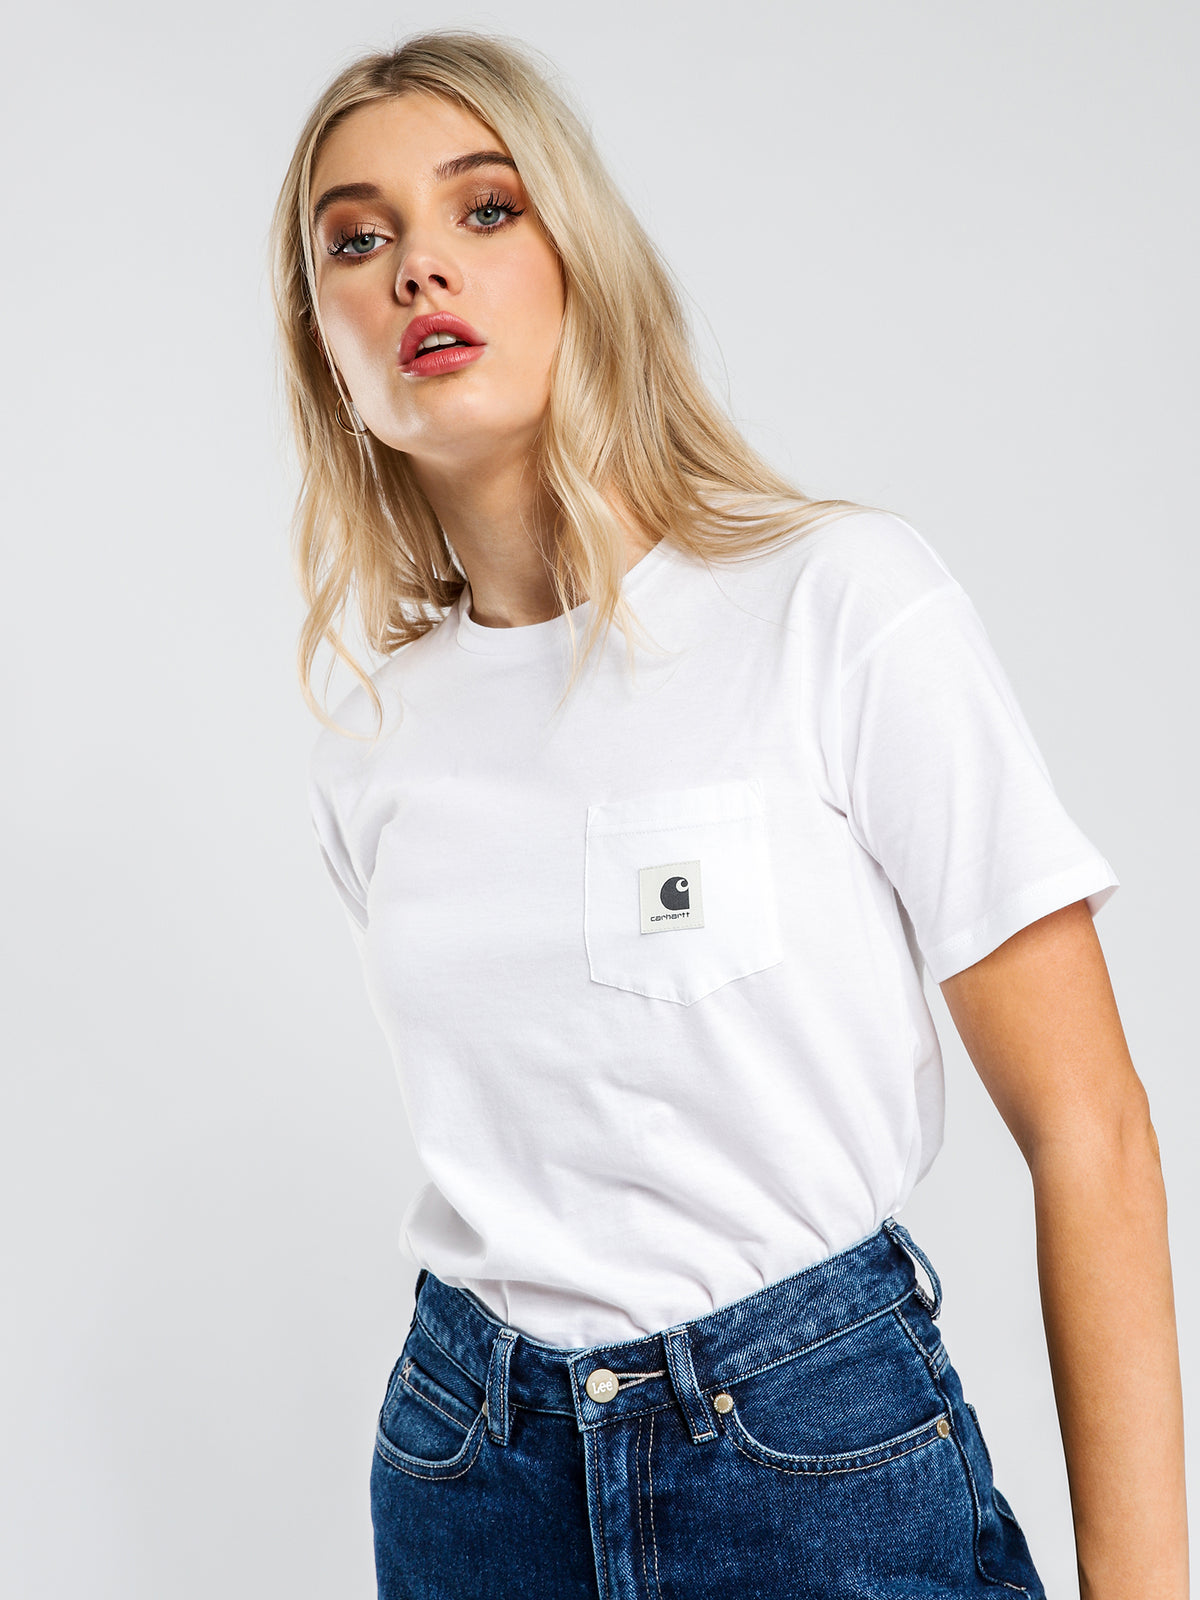 W S/S Carrie Pocket T-Shirt in White